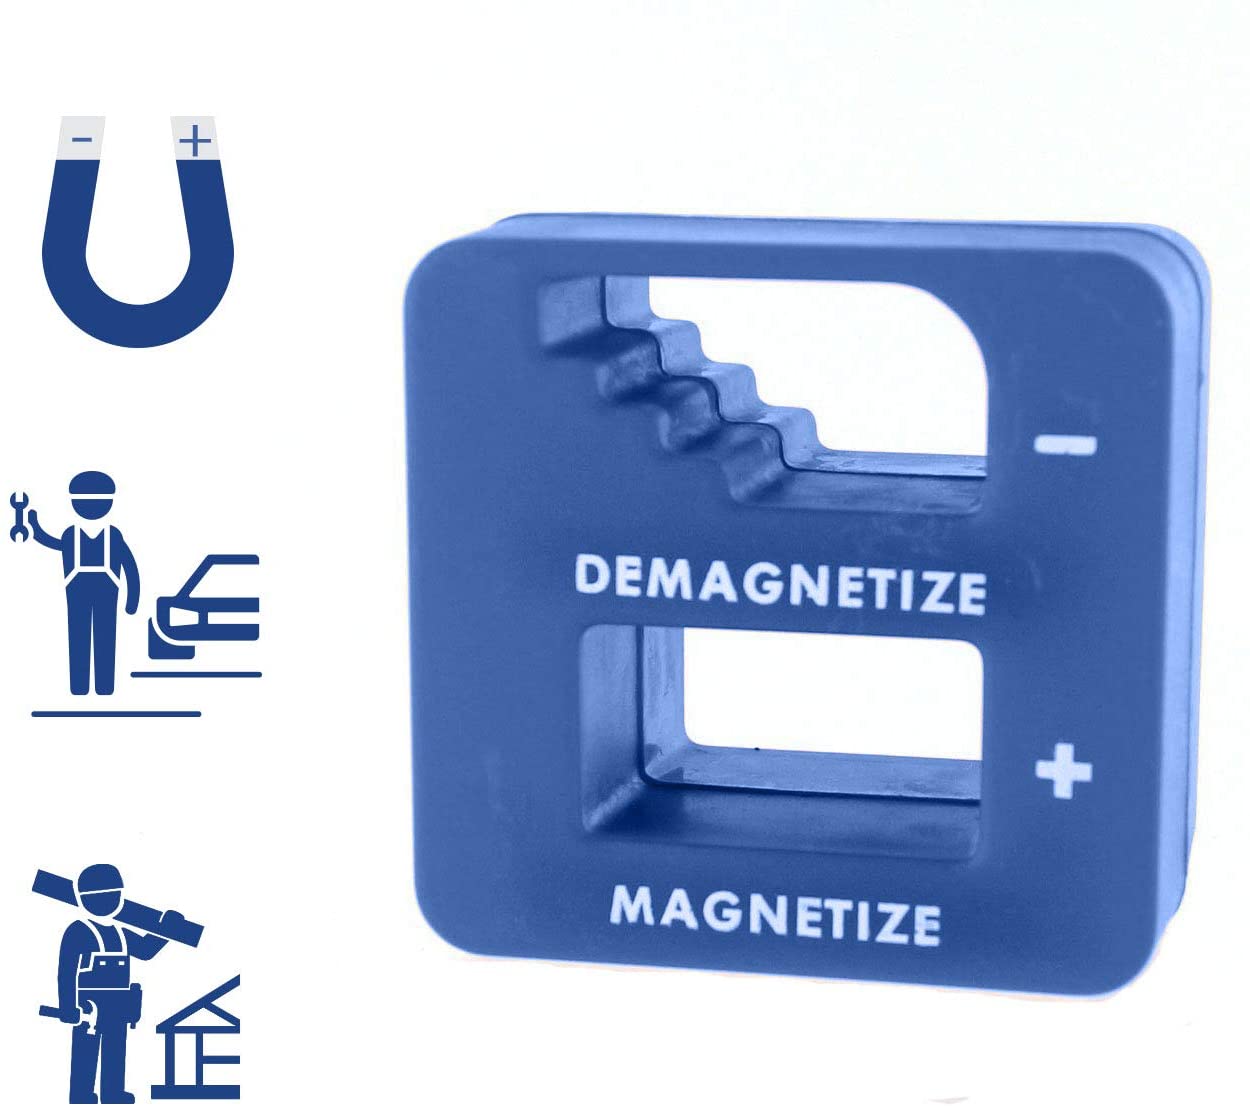 HD-SDMG: Precision Demagnetizer/ Magnetizer - For Screwdrivers, Screws, Drill, Drill Bits, Sockets, Nuts, Bolts, Nails And Construction Tools